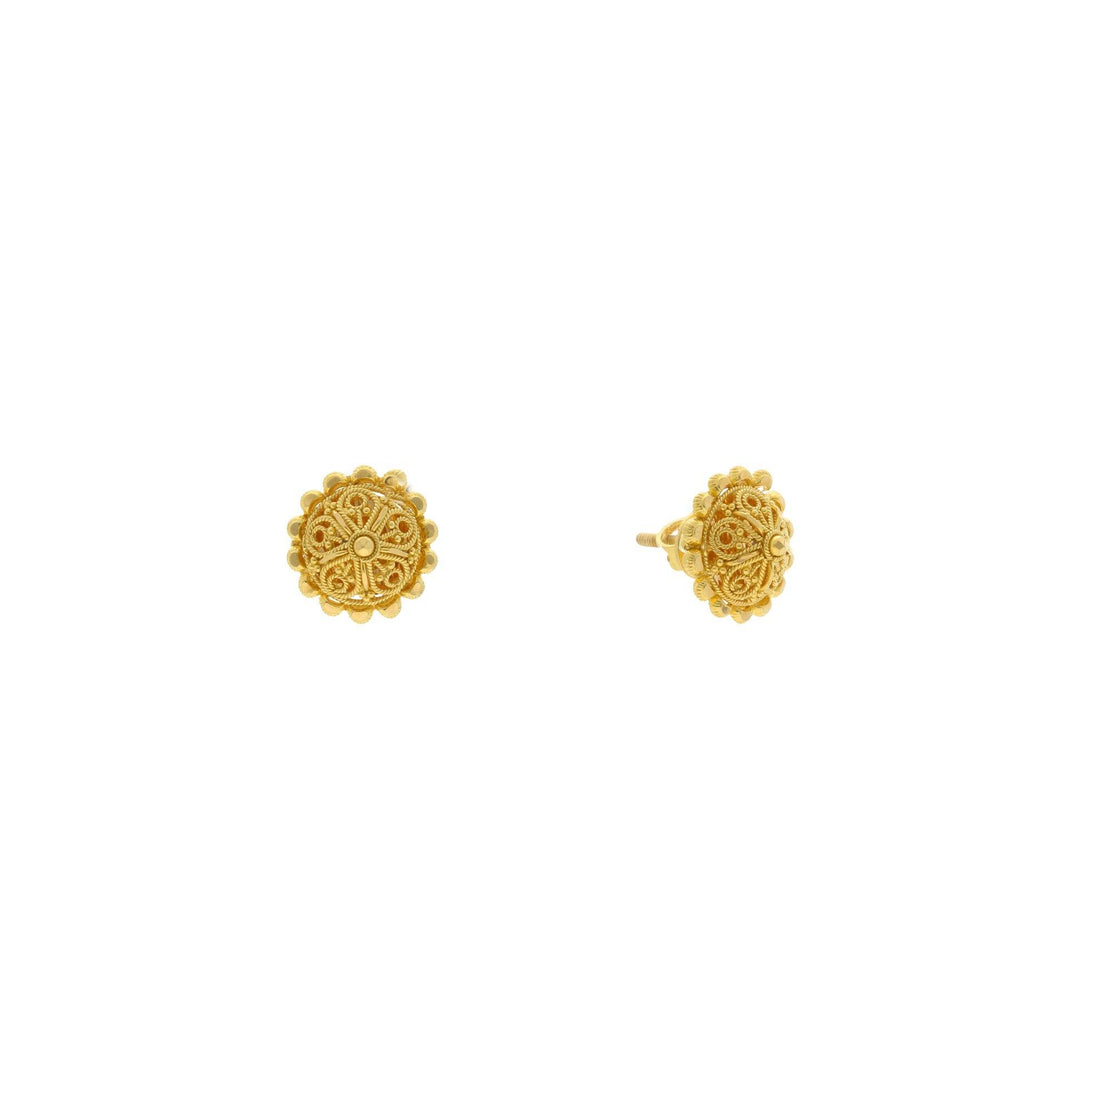 5 To 6 Gold Gold Earrings || New Designs Earrings With Price - YouTube